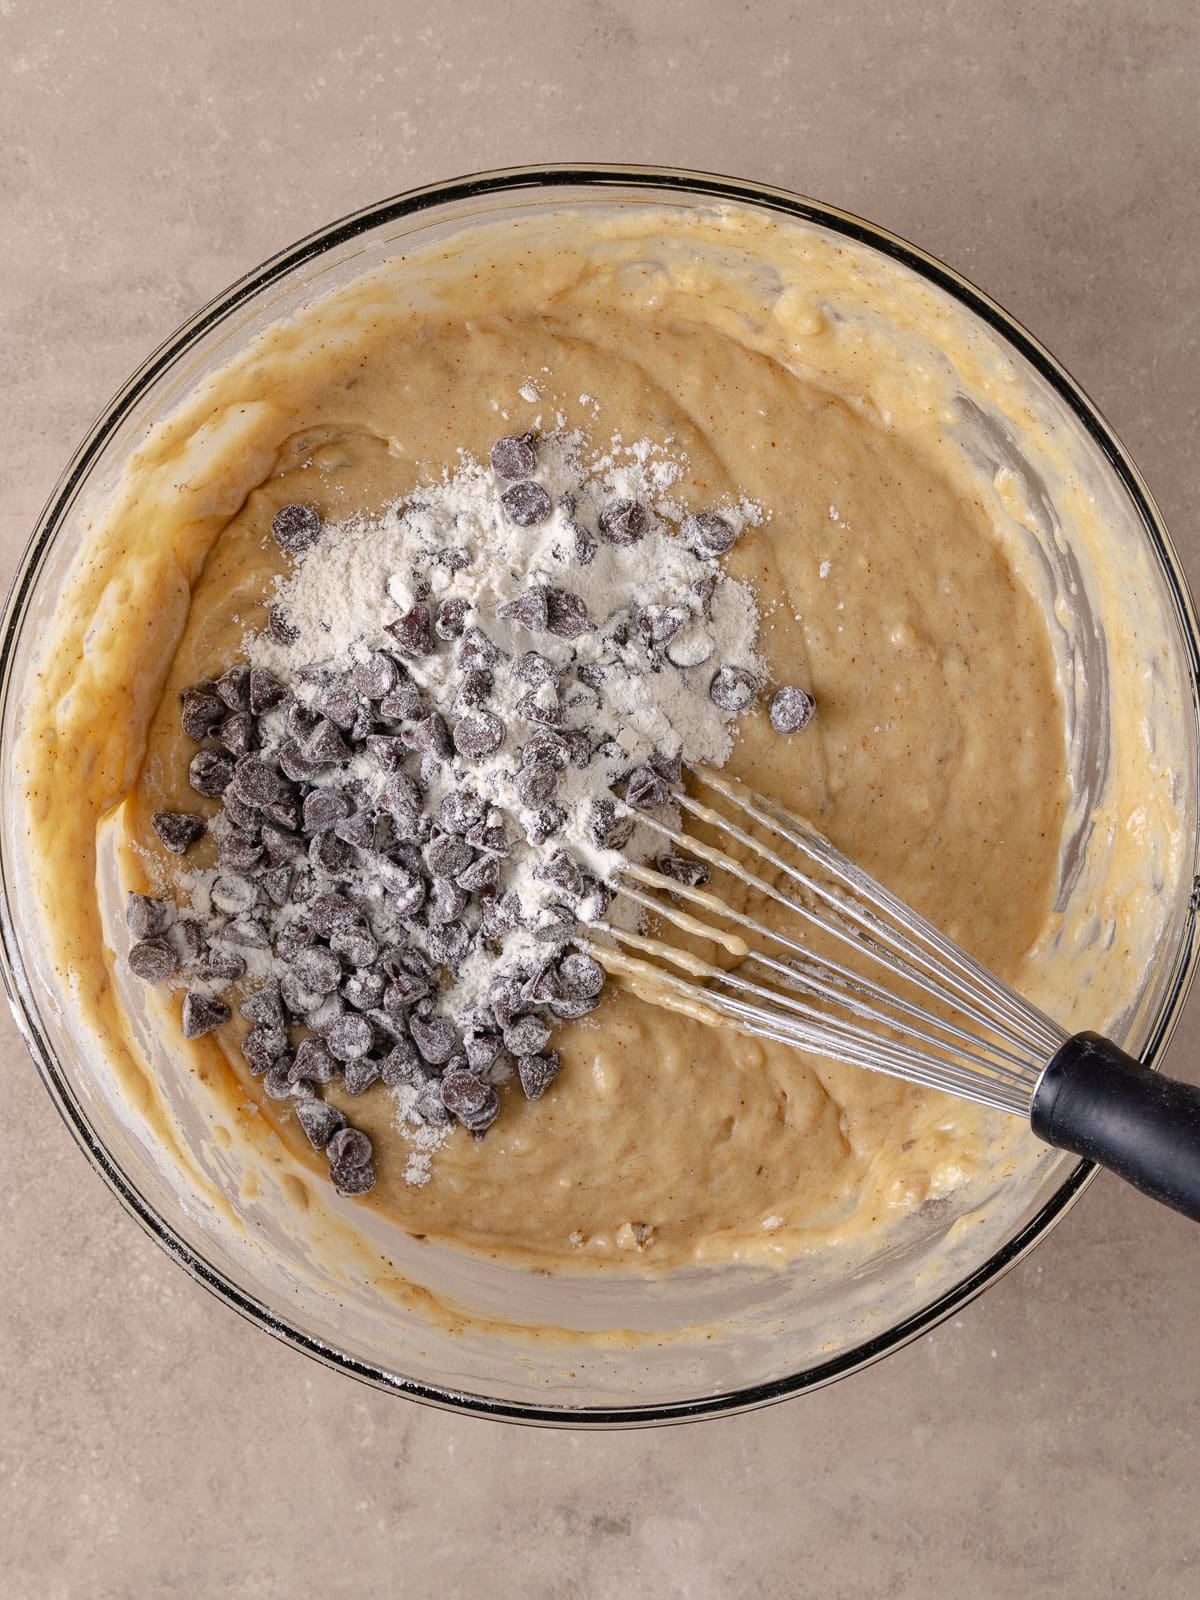 Flour coated chocolate chips are added to the batter and is ready to be incorporated.